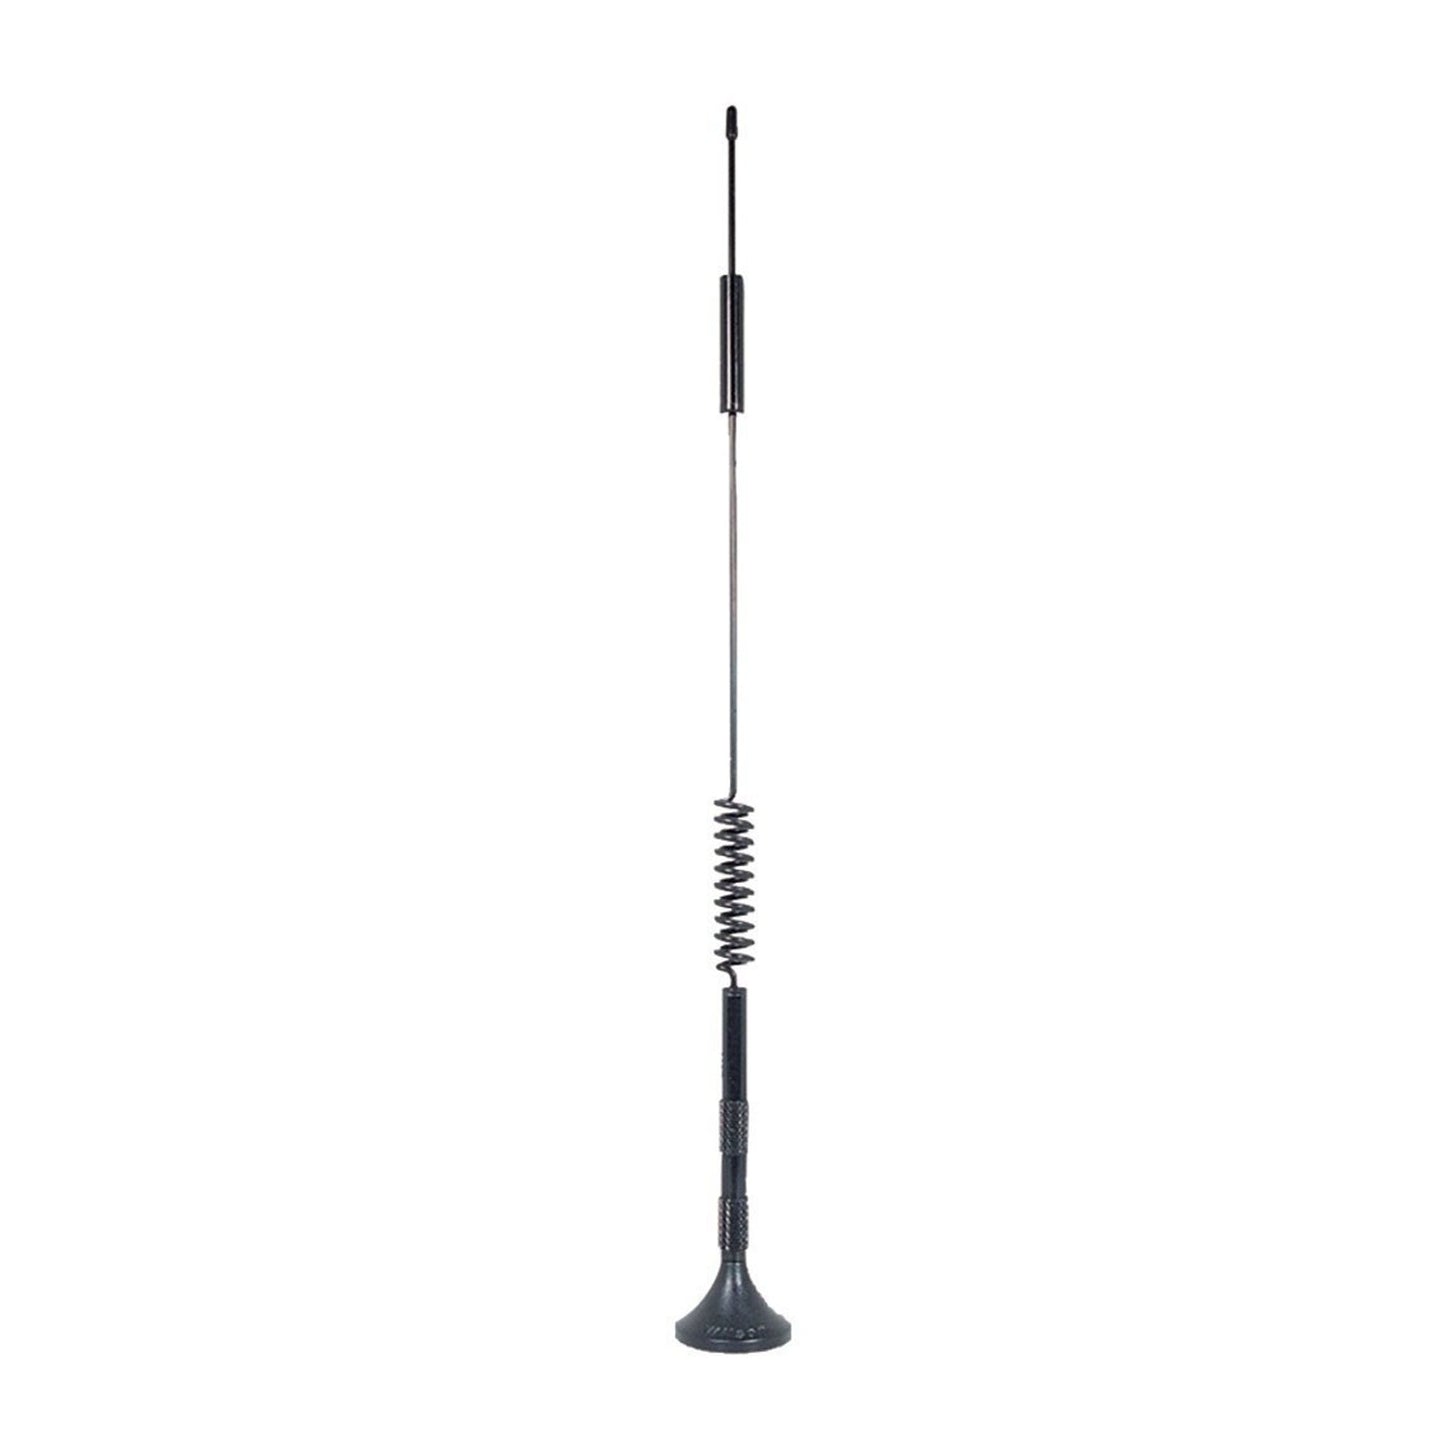 Wilson 12" Magnetic Mount Antenna 10 foot cable - FME (301103) - 3G/4G - 700/850/1700/1900/2100 MHz - 680WI301103